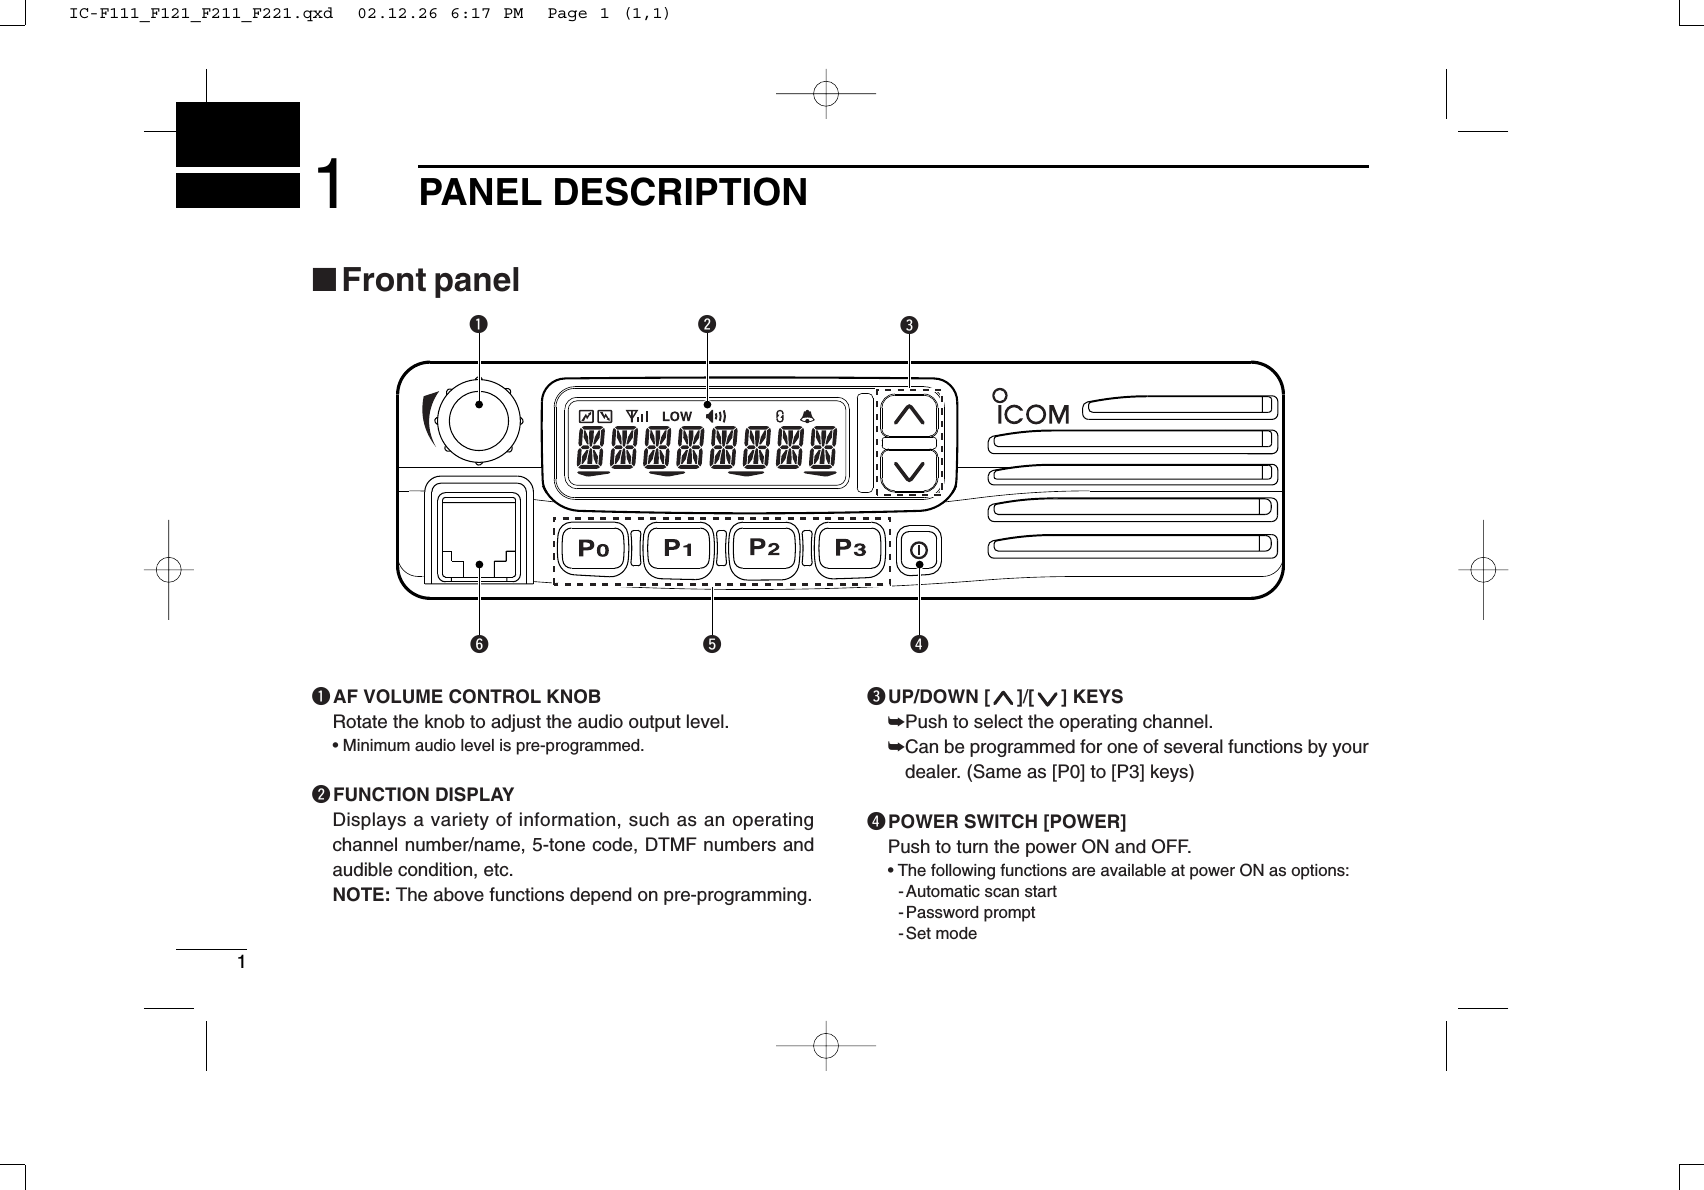 11PANEL DESCRIPTIONytrqwe■Front panelqAF VOLUME CONTROL KNOBRotate the knob to adjust the audio output level.• Minimum audio level is pre-programmed.wFUNCTION DISPLAYDisplays a variety of information, such as an operatingchannel number/name, 5-tone code, DTMF numbers andaudible condition, etc.NOTE: The above functions depend on pre-programming.eUP/DOWN [ ]/[ ] KEYS➥Push to select the operating channel.➥Can be programmed for one of several functions by yourdealer. (Same as [P0] to [P3] keys)rPOWER SWITCH [POWER]Push to turn the power ON and OFF.• The following functions are available at power ON as options:- Automatic scan start- Password prompt- Set modeIC-F111_F121_F211_F221.qxd  02.12.26 6:17 PM  Page 1 (1,1)